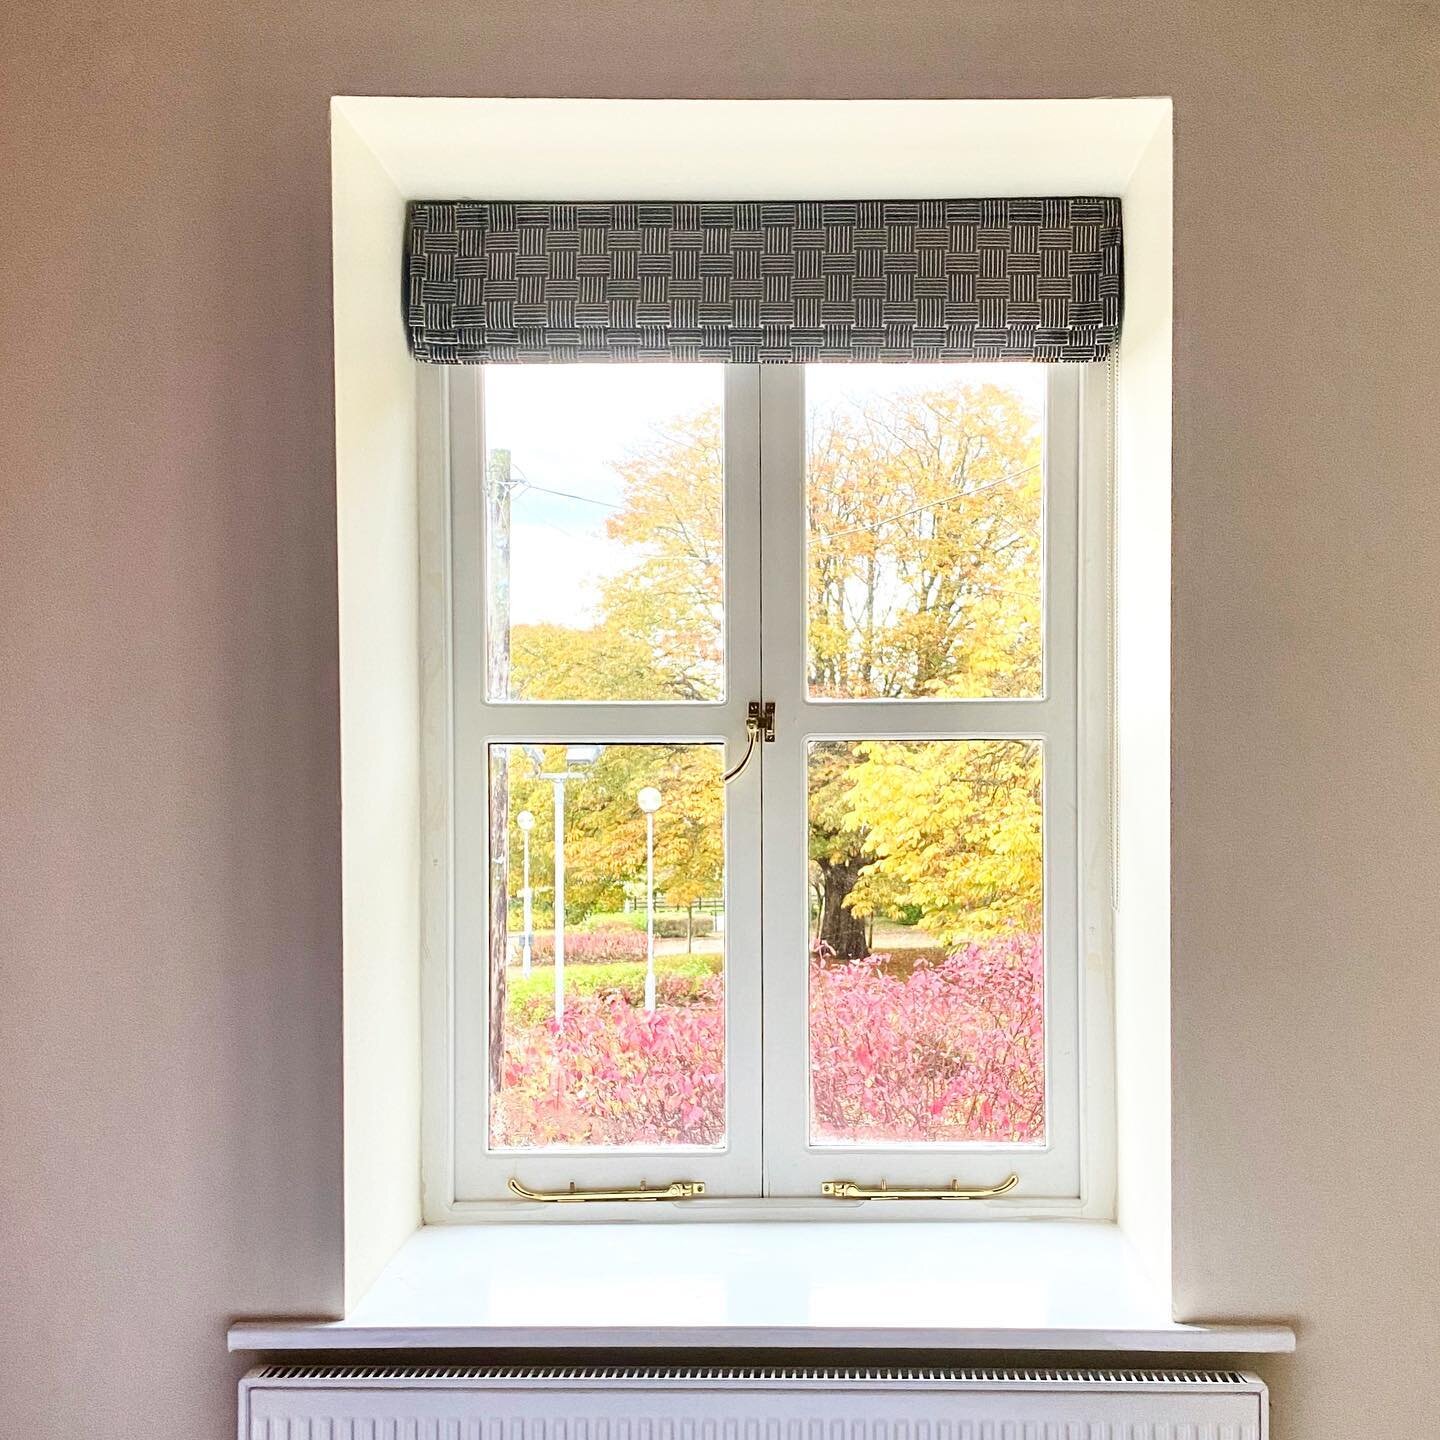 With the weather turning are you ready? We stock bonded lining for all drafty windows and doors! We will also still be stitching through this lockdown. Message us for more details! Back to lining - Bonded lining can be used in curtains or roman blind